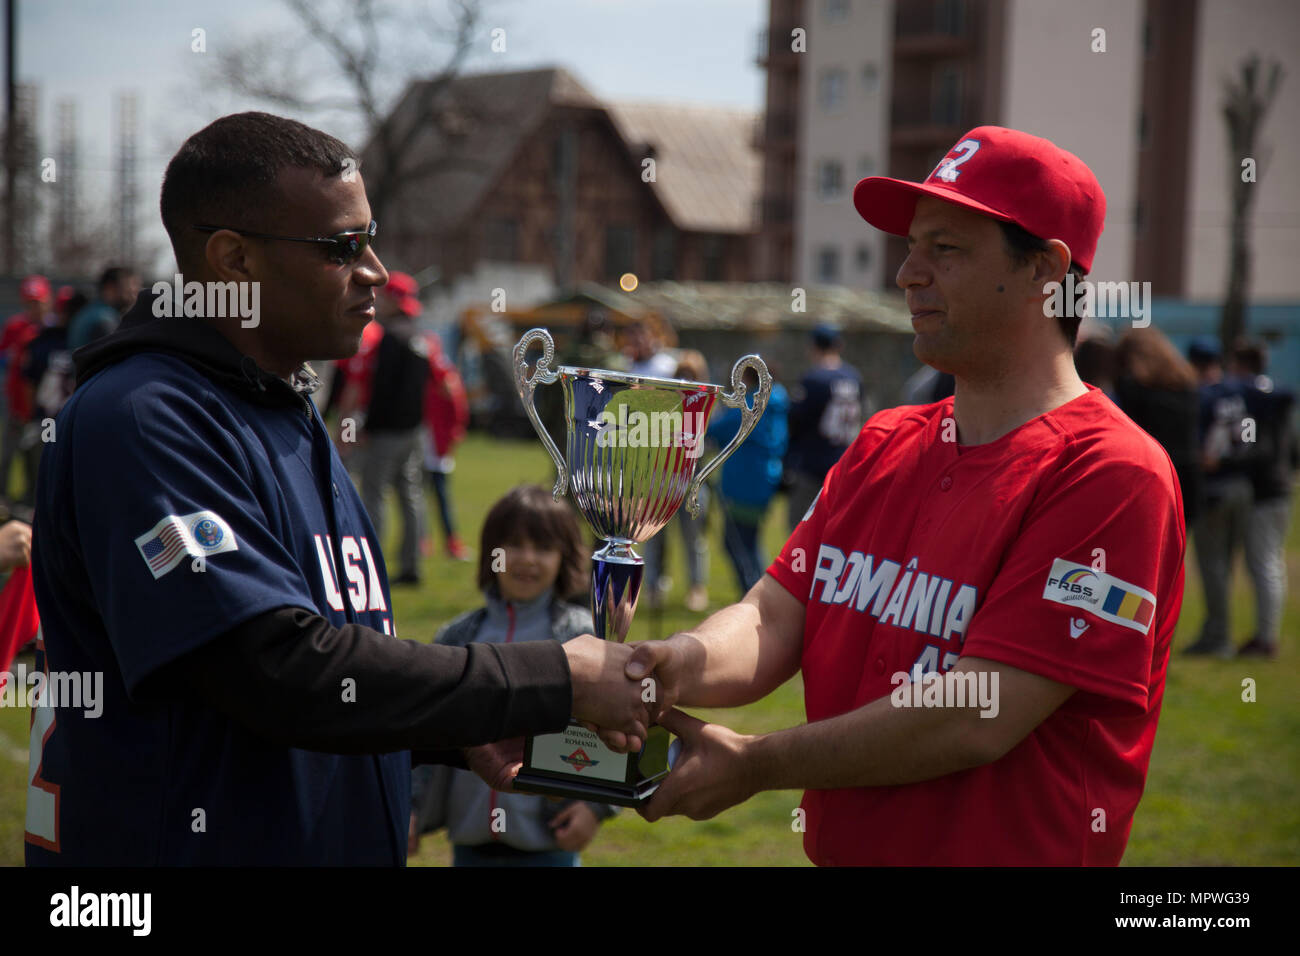 A U.S. Marine with the Black Sea Rotational Force 17.1 congratulates the Romanian coach on winning the Jackie Robinson Day baseball game between the U.S. Marines and a Romanian team in Constanta, Romania, April 15, 2017. The Marine and Romanian players all wore the number 42 jersey in honor of the 70th anniversary of Robinson becoming the first African American player in the Major League Baseball history. (U.S. Marine Corps photo by Cpl. Emily Dorumsgaard) Stock Photo